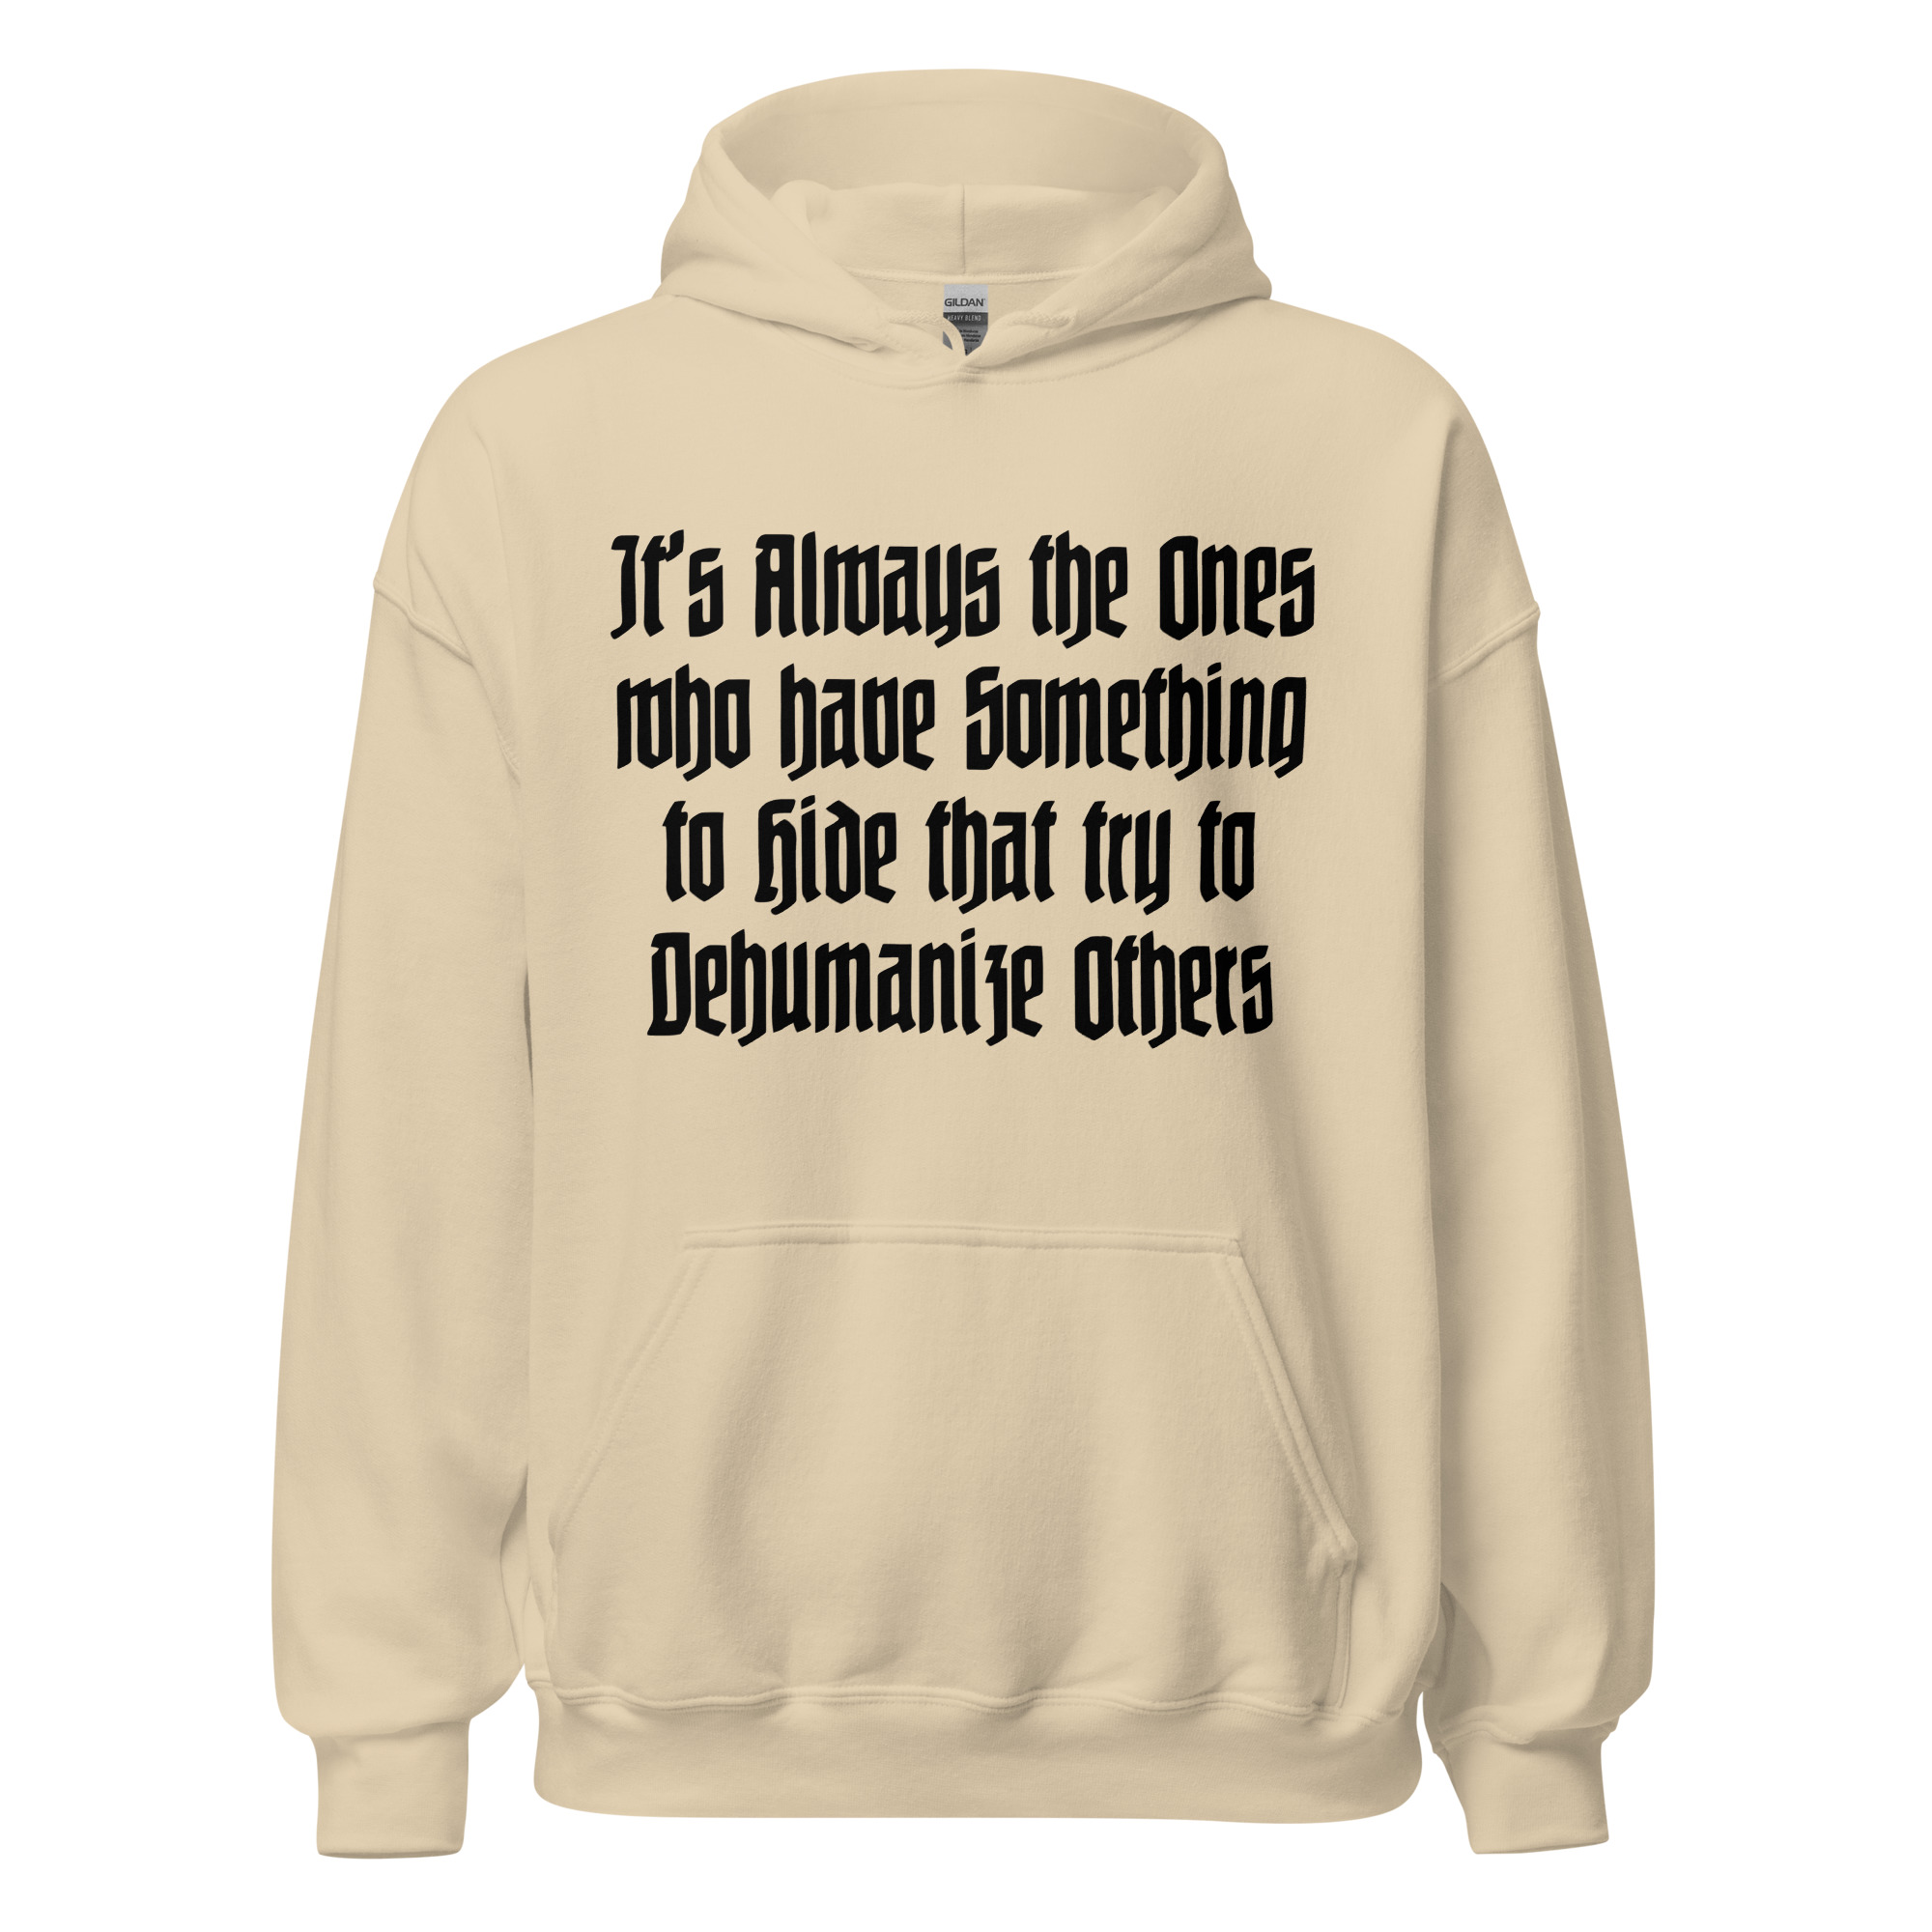 Featured image for “It’s Always the Ones who have Something to Hide - Unisex Hoodie”